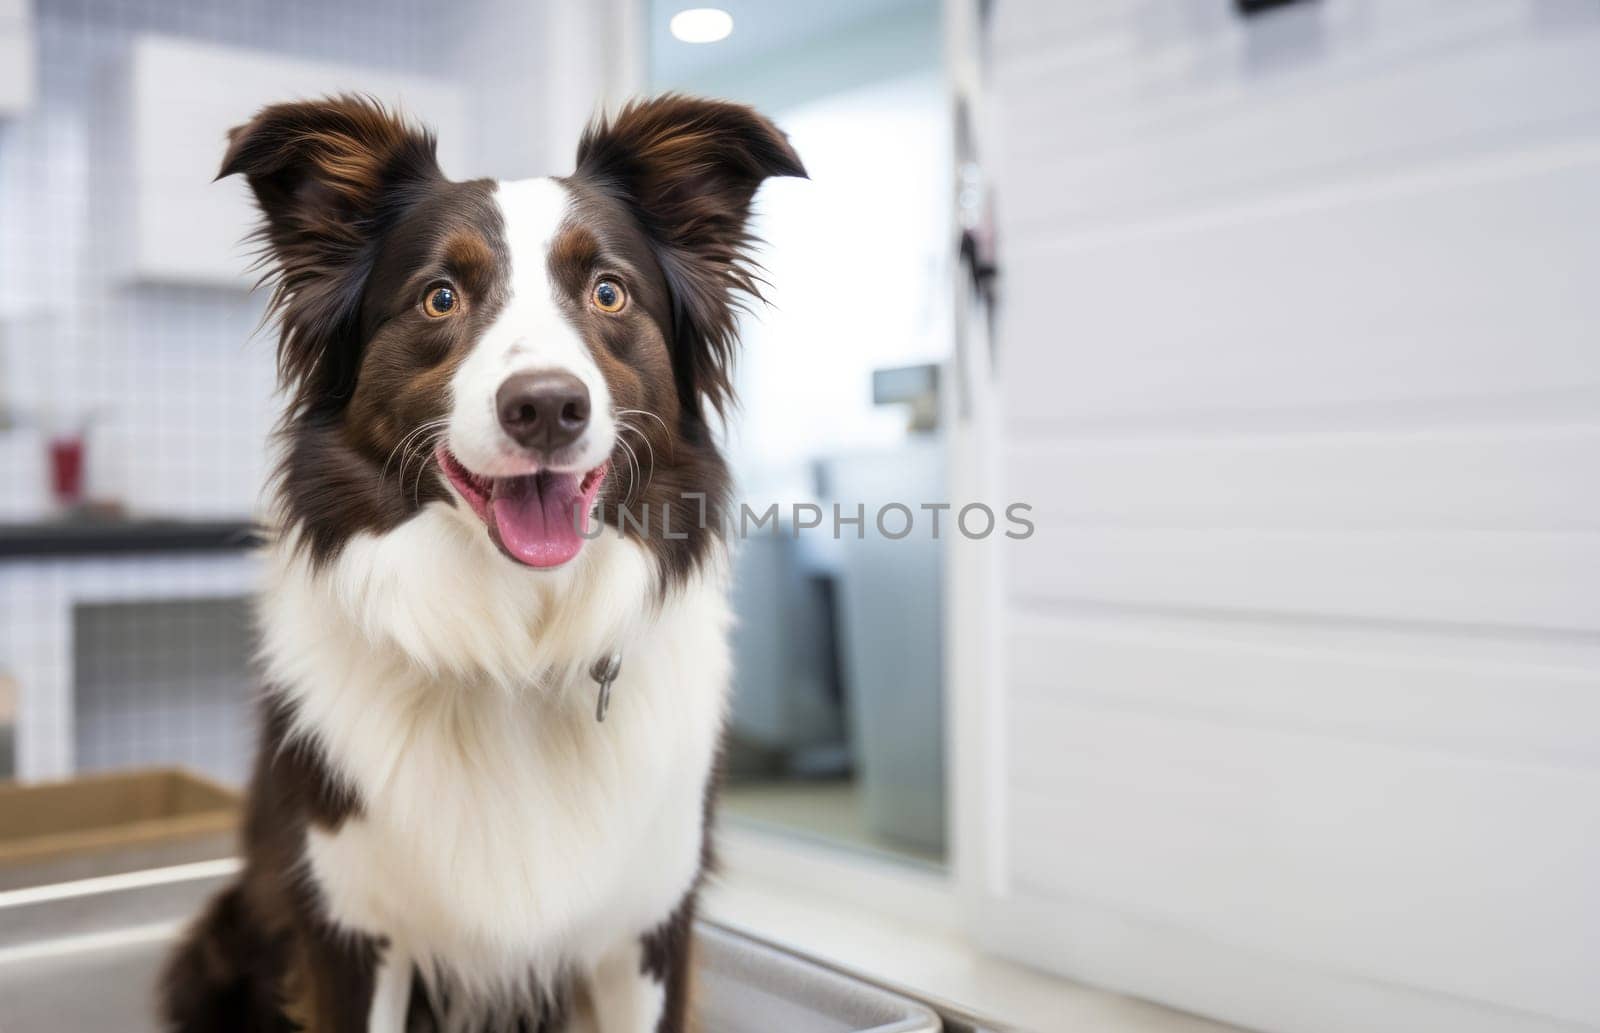 A black-and-white dog patiently awaits its veterinary examination in the clinic.Generated image.